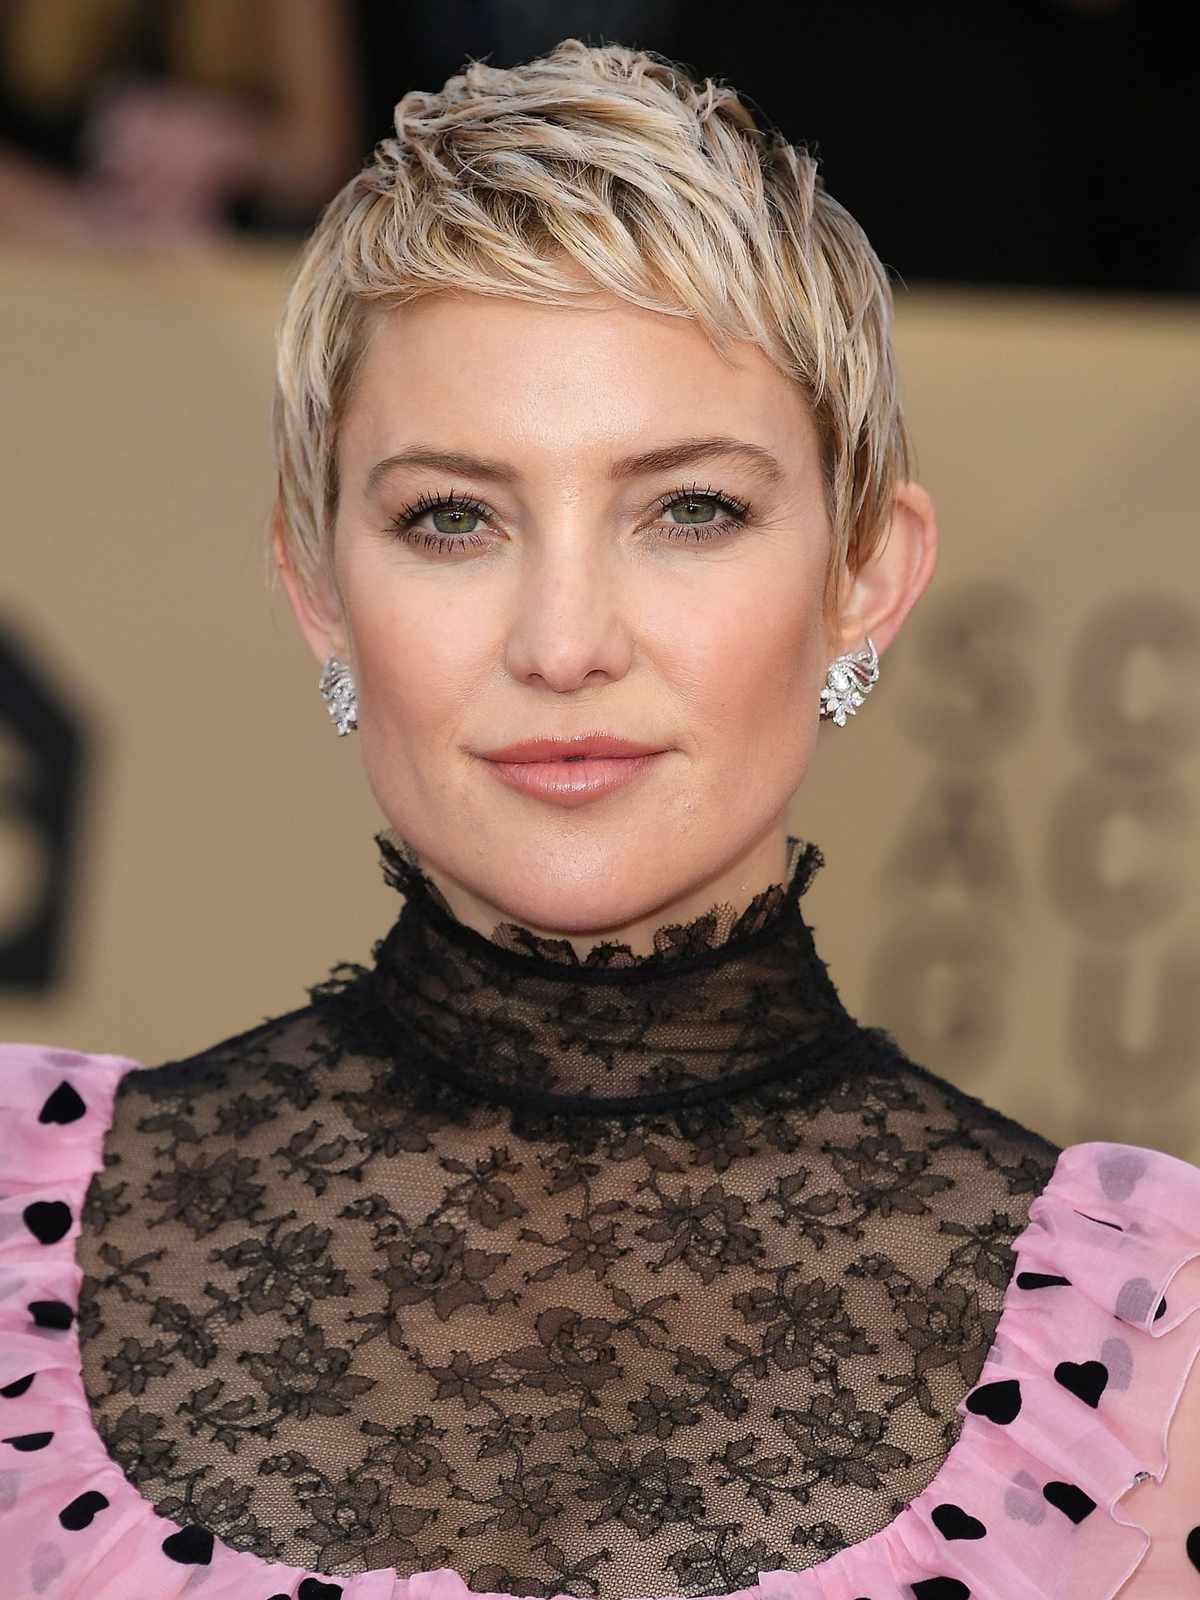 Hairstyles for Women Over 40 to Try in 2021